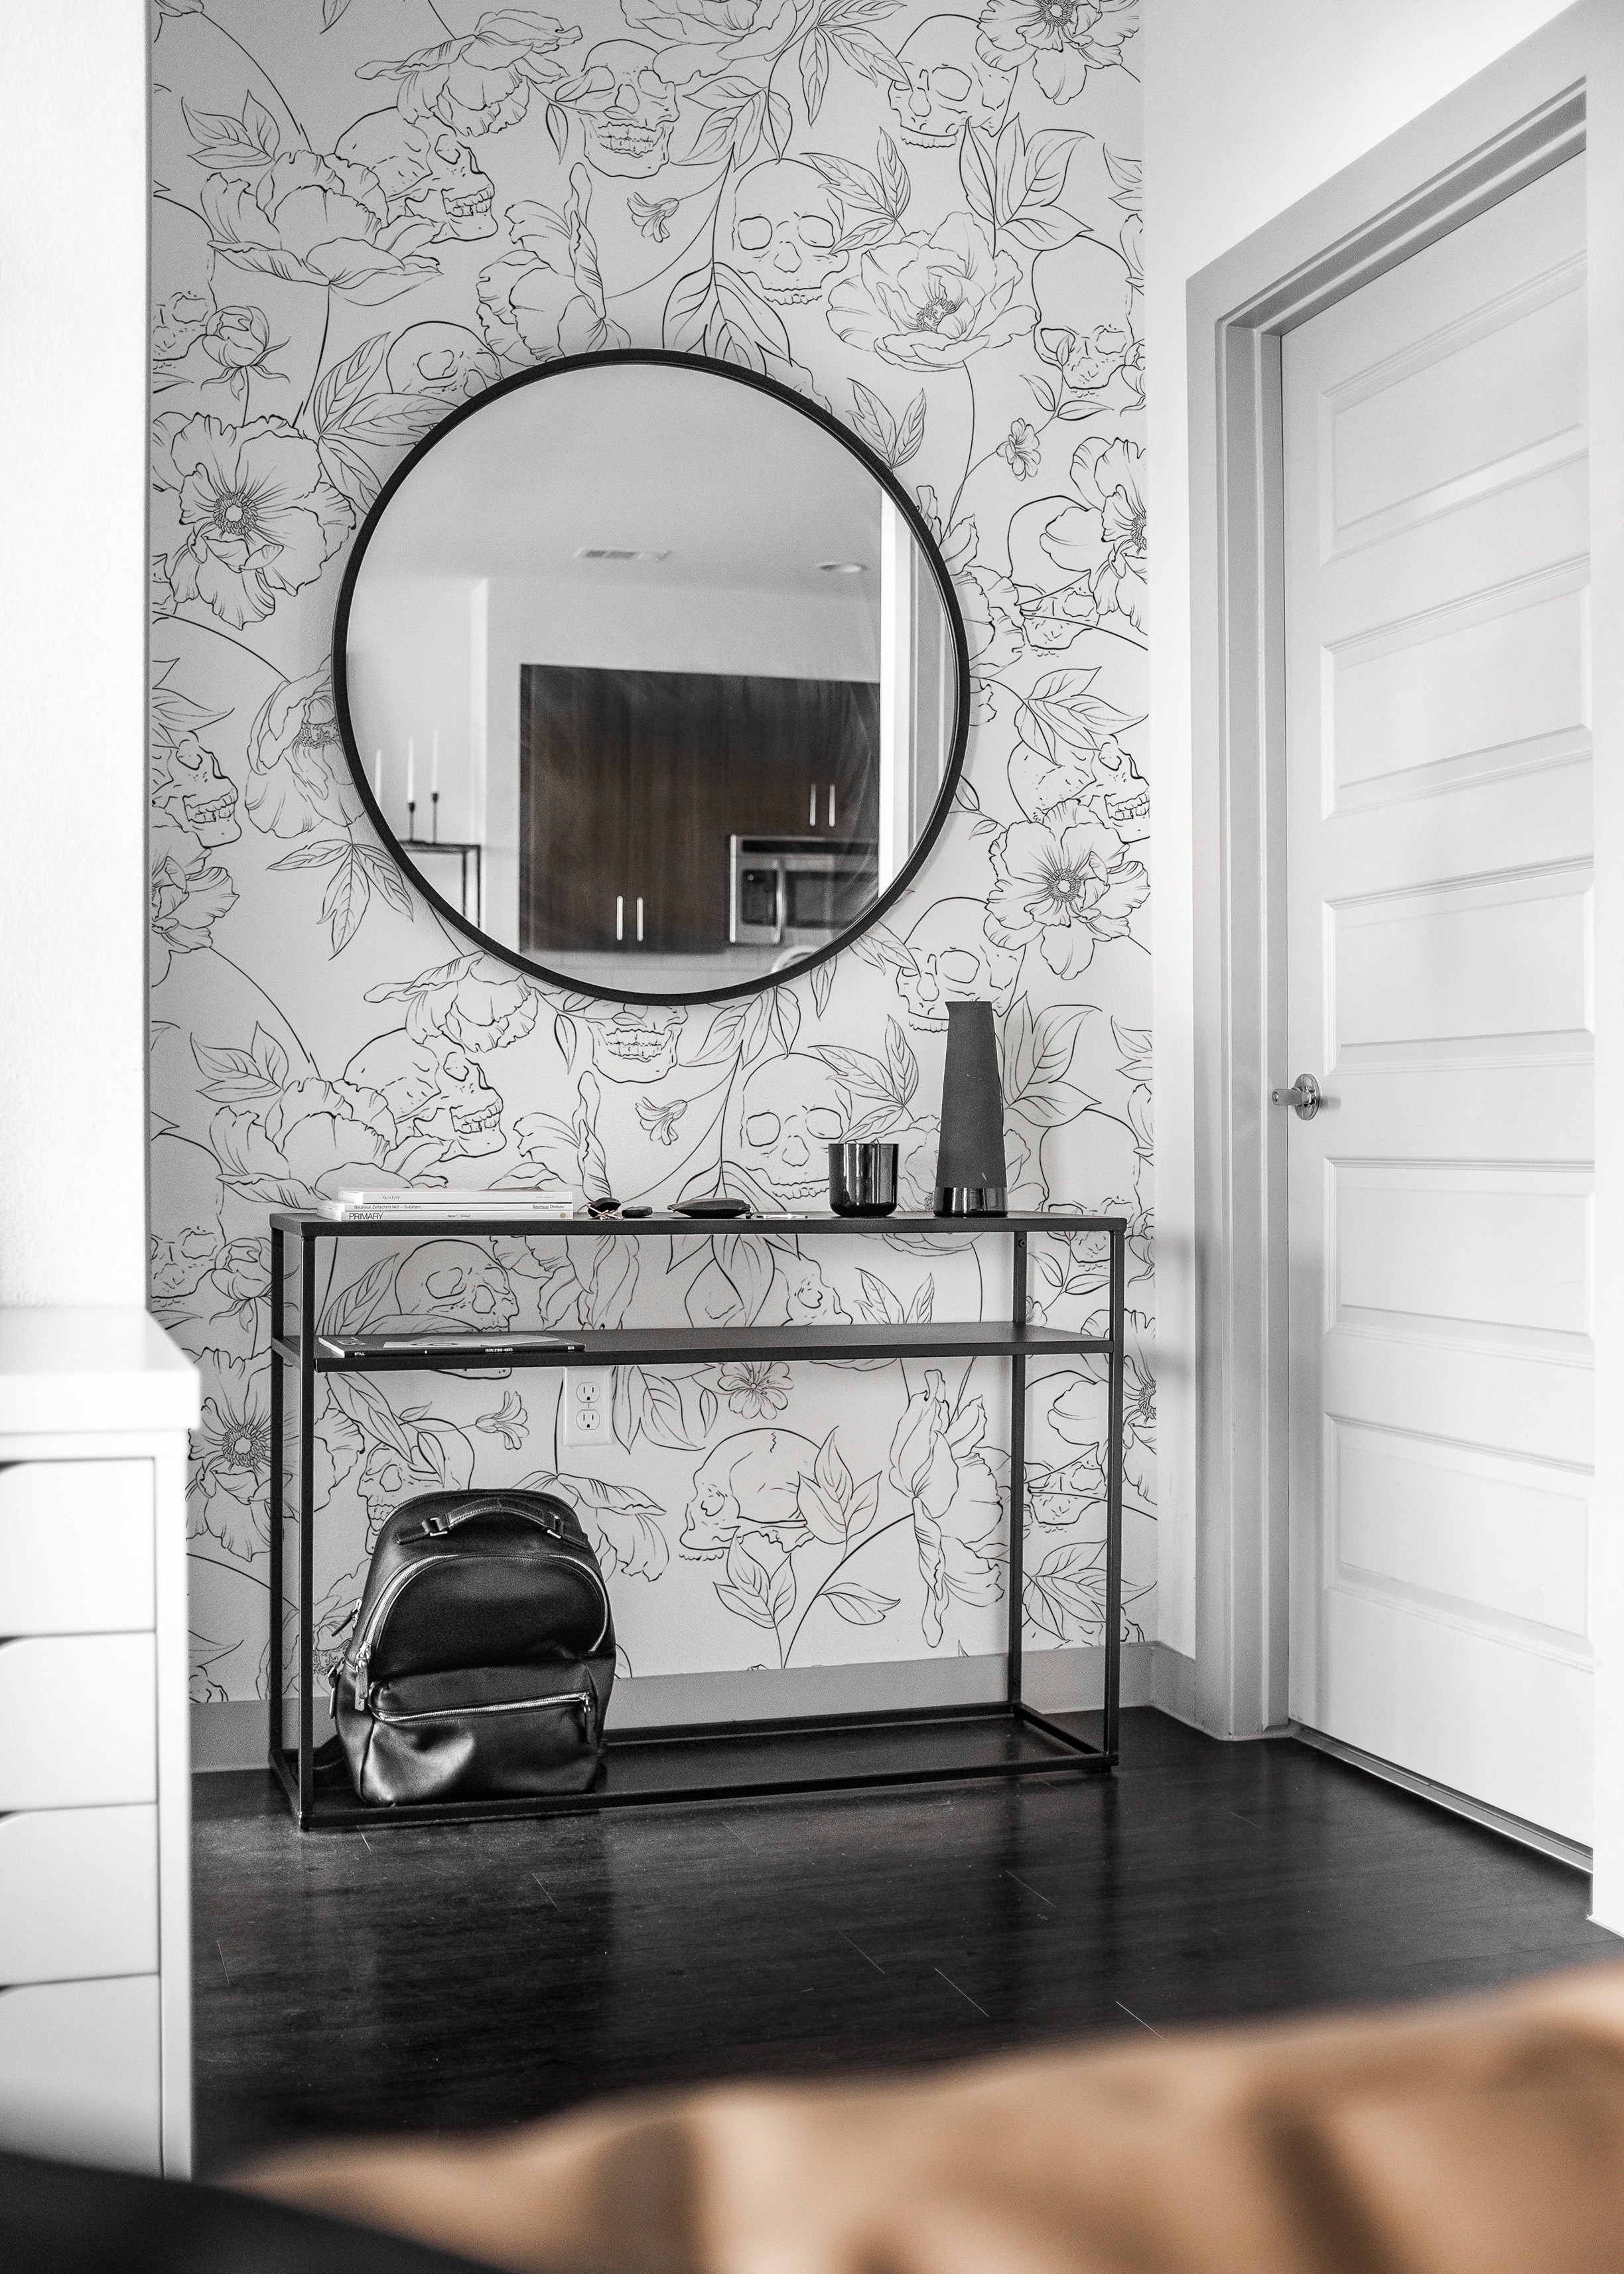 Elegant entryway decorated with Dainty Skull Floral Wallpaper, displaying a bold pattern of floral designs and hidden skulls in a line art style. A large round mirror and minimalist console table complement the wallpaper’s artistic flair.